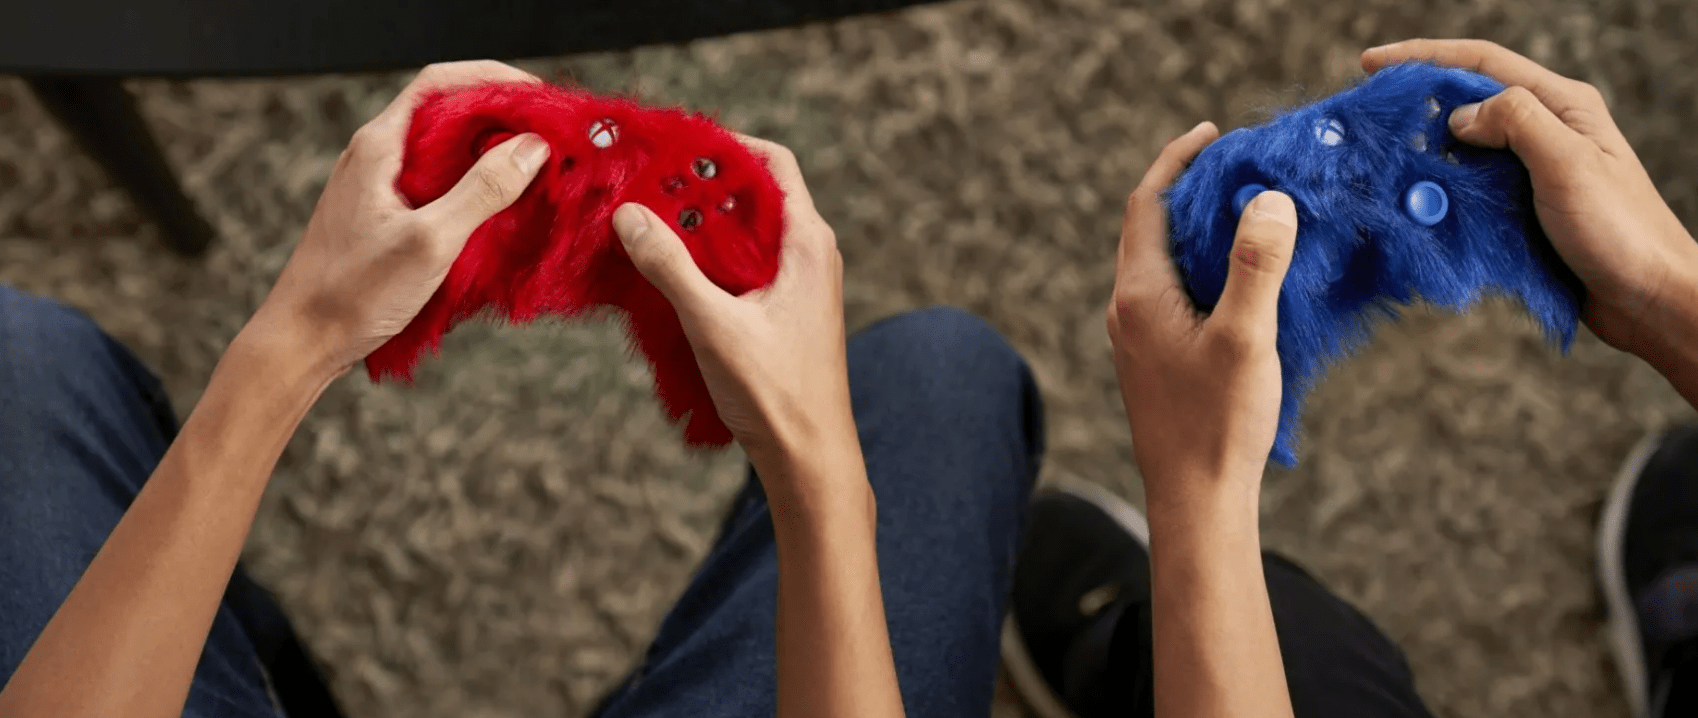 Gotta Tweet Fast: Xbox To Give Away Custom Sonic-themed Console, Controllers In Online Lucky Draw